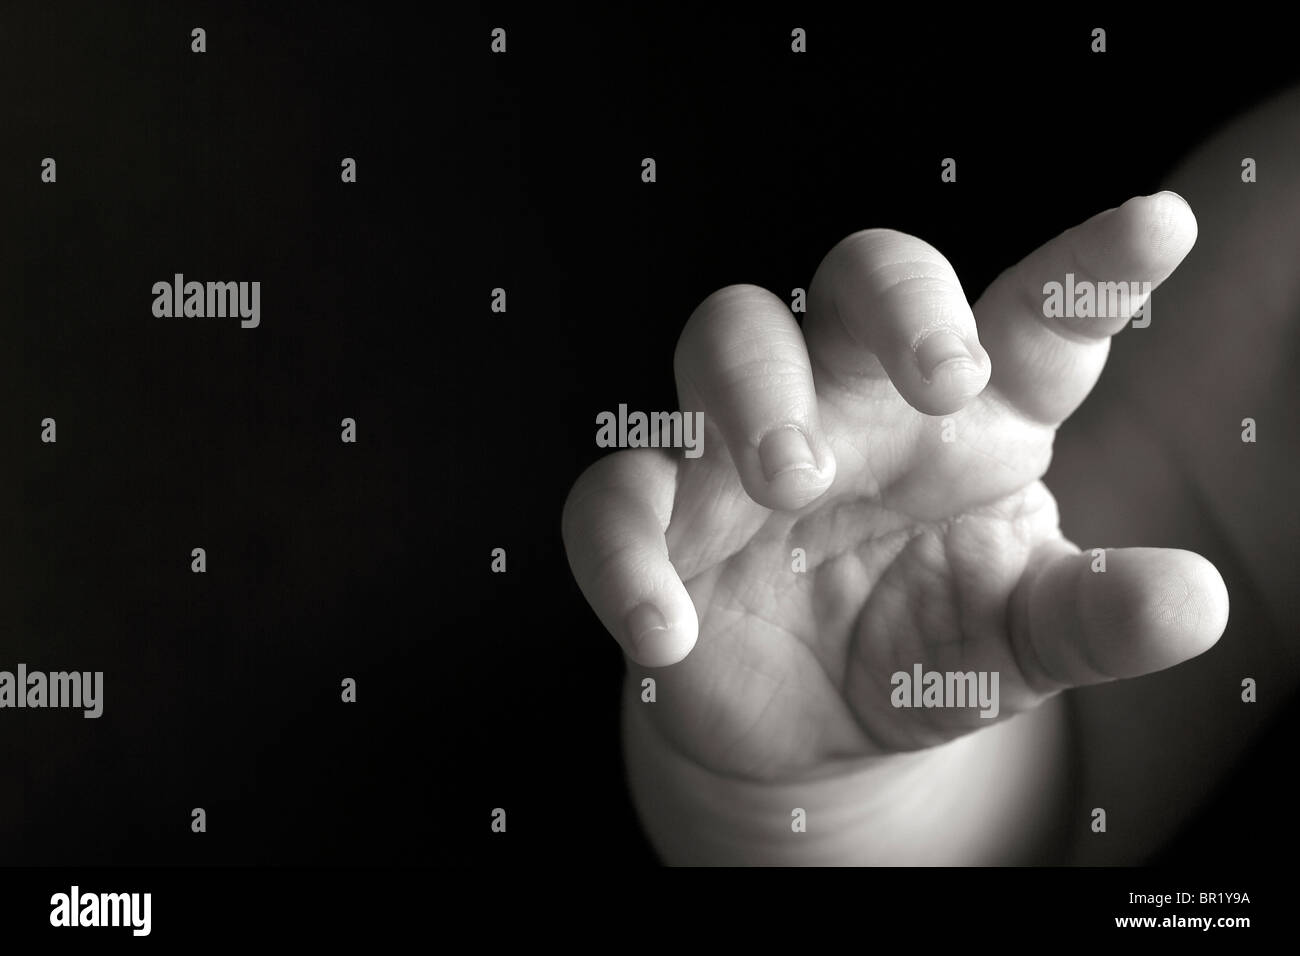 Newborn baby's hand. black and white. Looks like the baby is reaching out to touch. Stock Photo